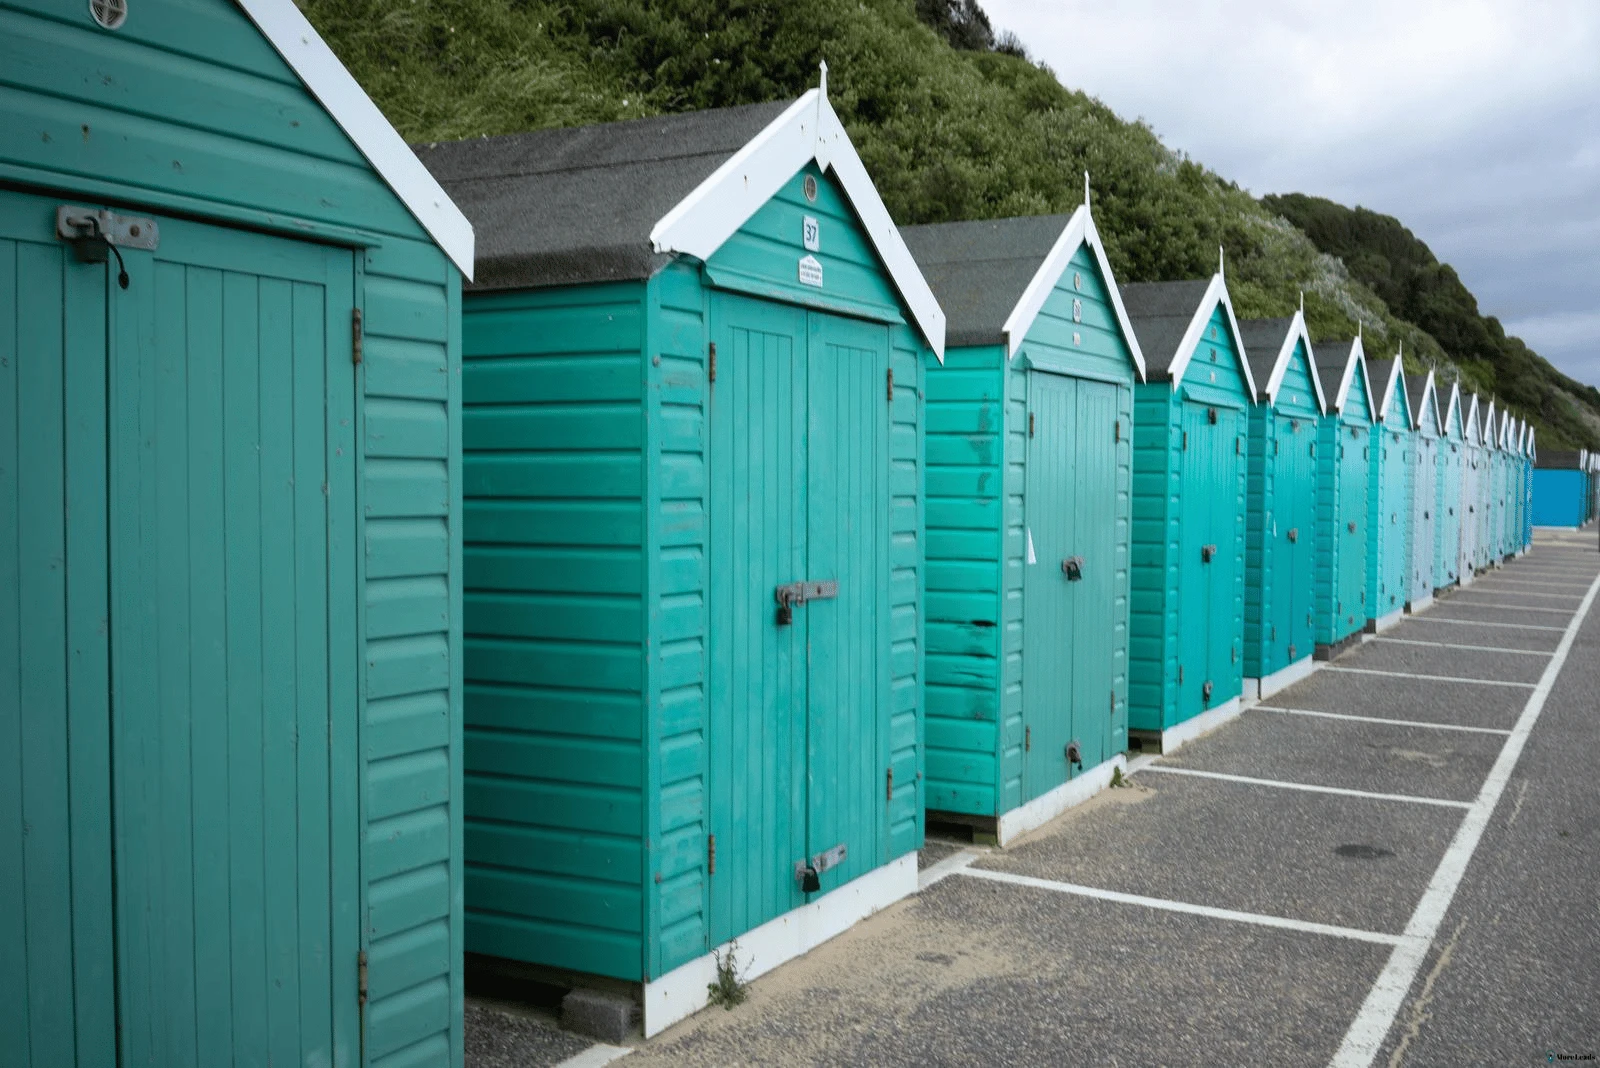 More Leads Local at Boscombe Beach Huts - providing Bournemouth Businesses with local SEO.